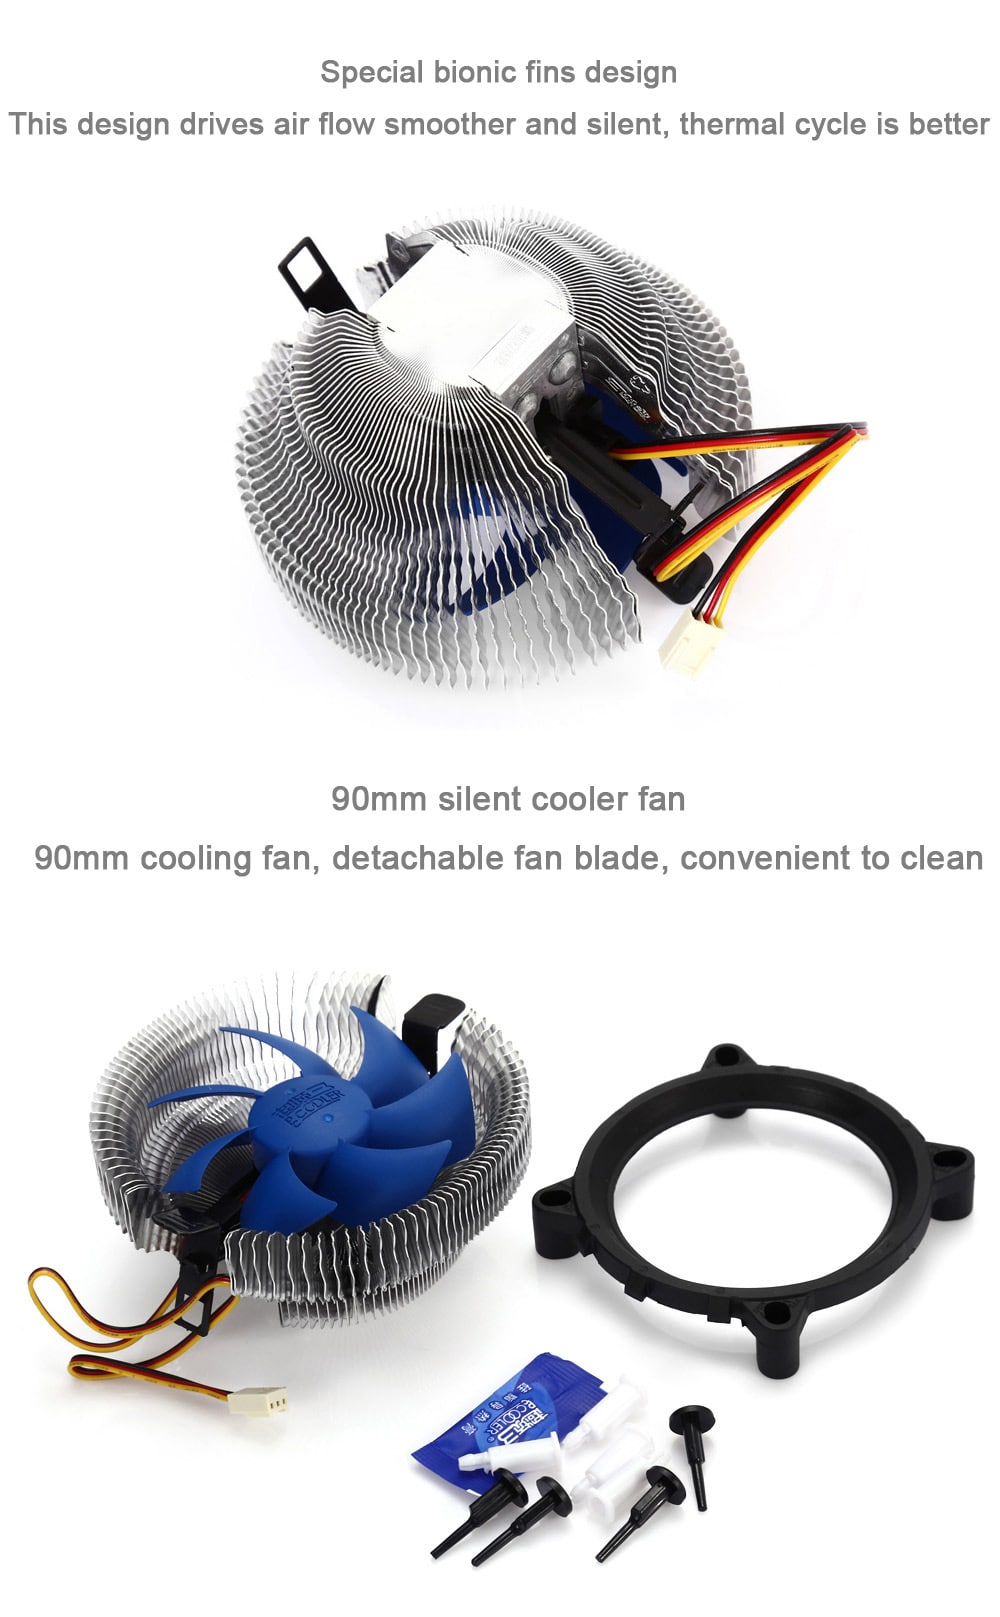 PCCOOLER Qingniao 3 Desktop CPU Cooling Fan Compatible with Intel / AMD- Silver and Blue